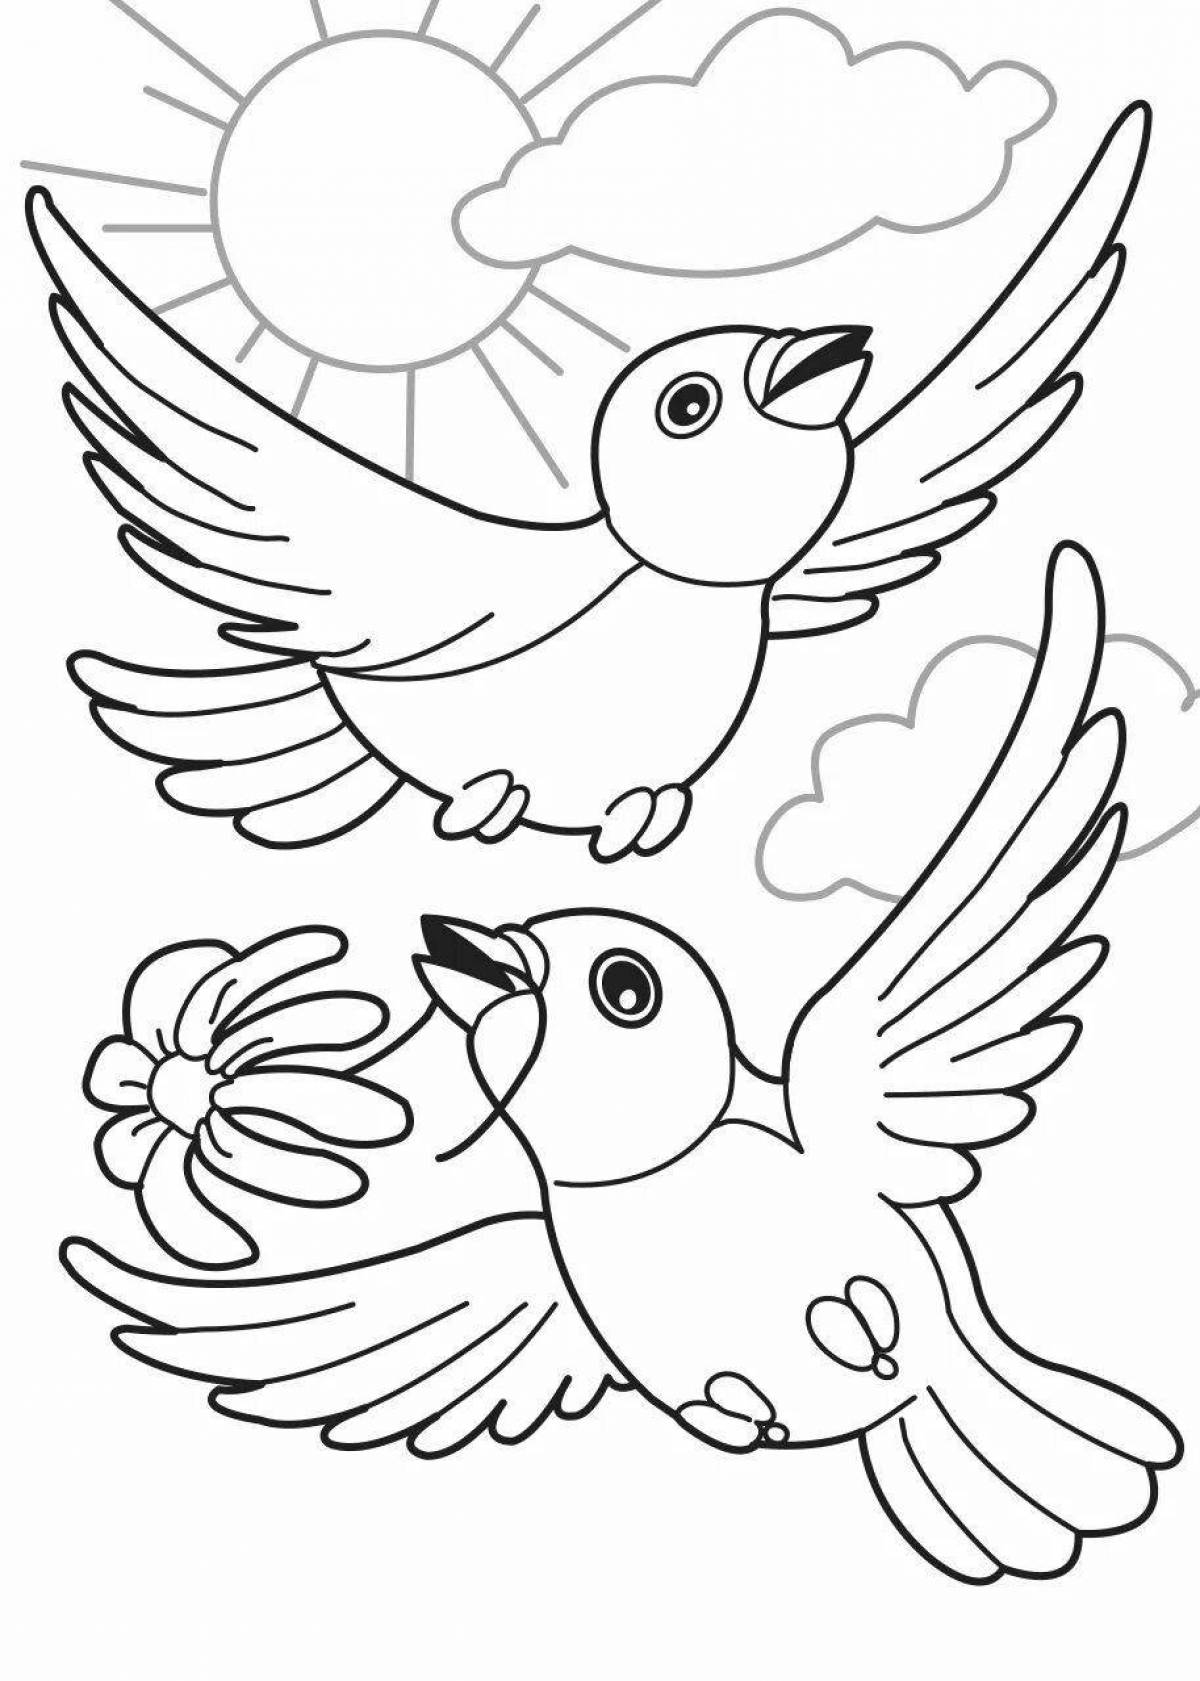 Great bird coloring book for 5-6 year olds